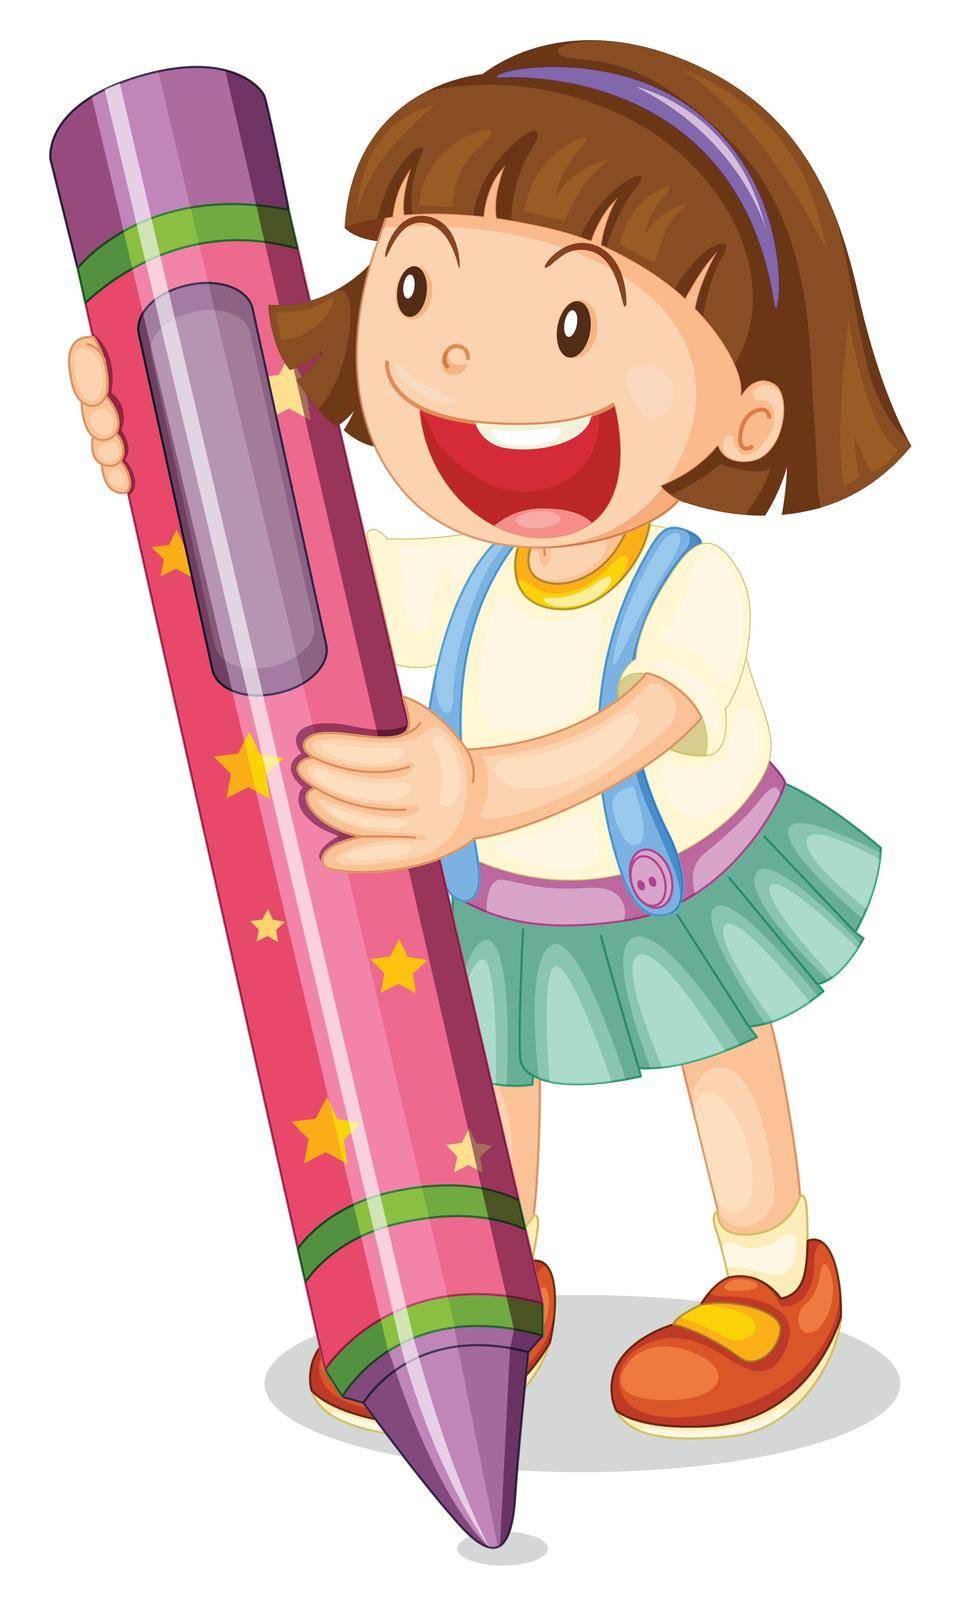 Illustration of a girl with large crayon